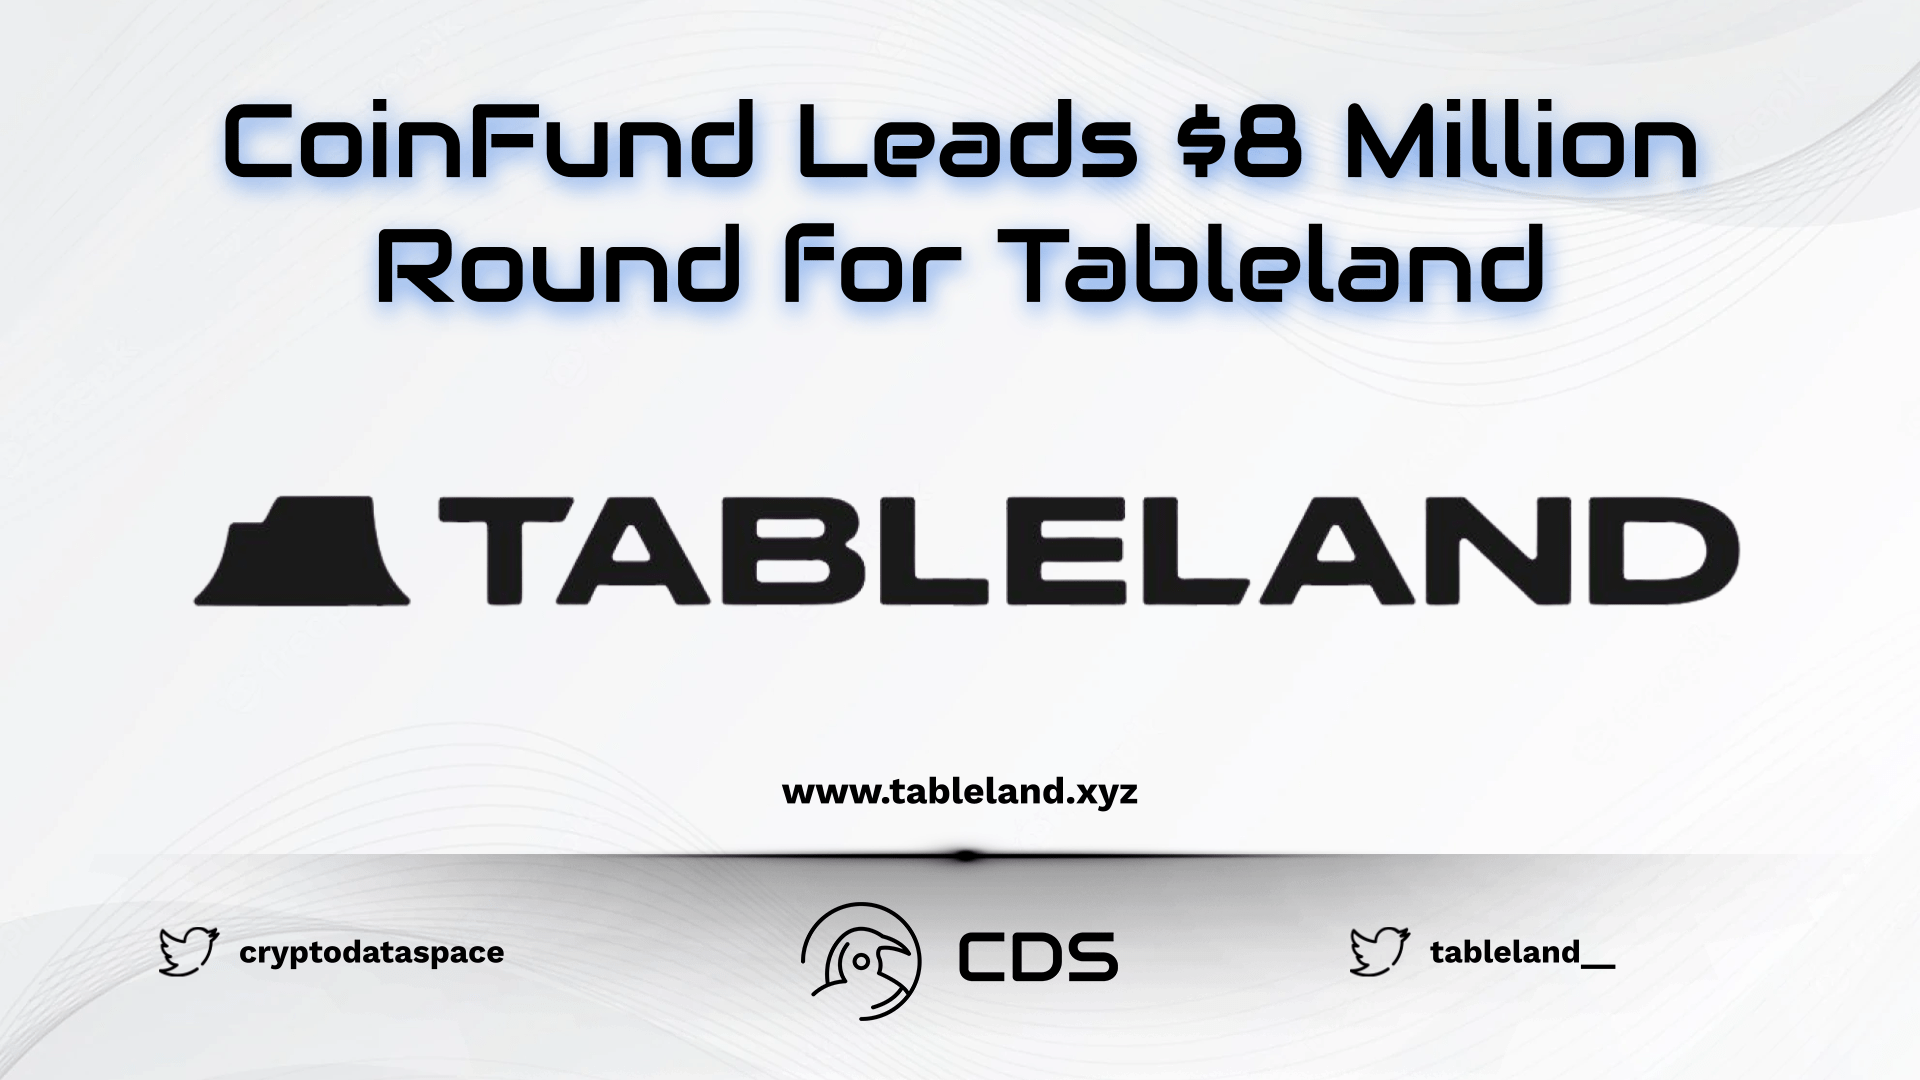 CoinFund Leads $8 Million Round for Tableland